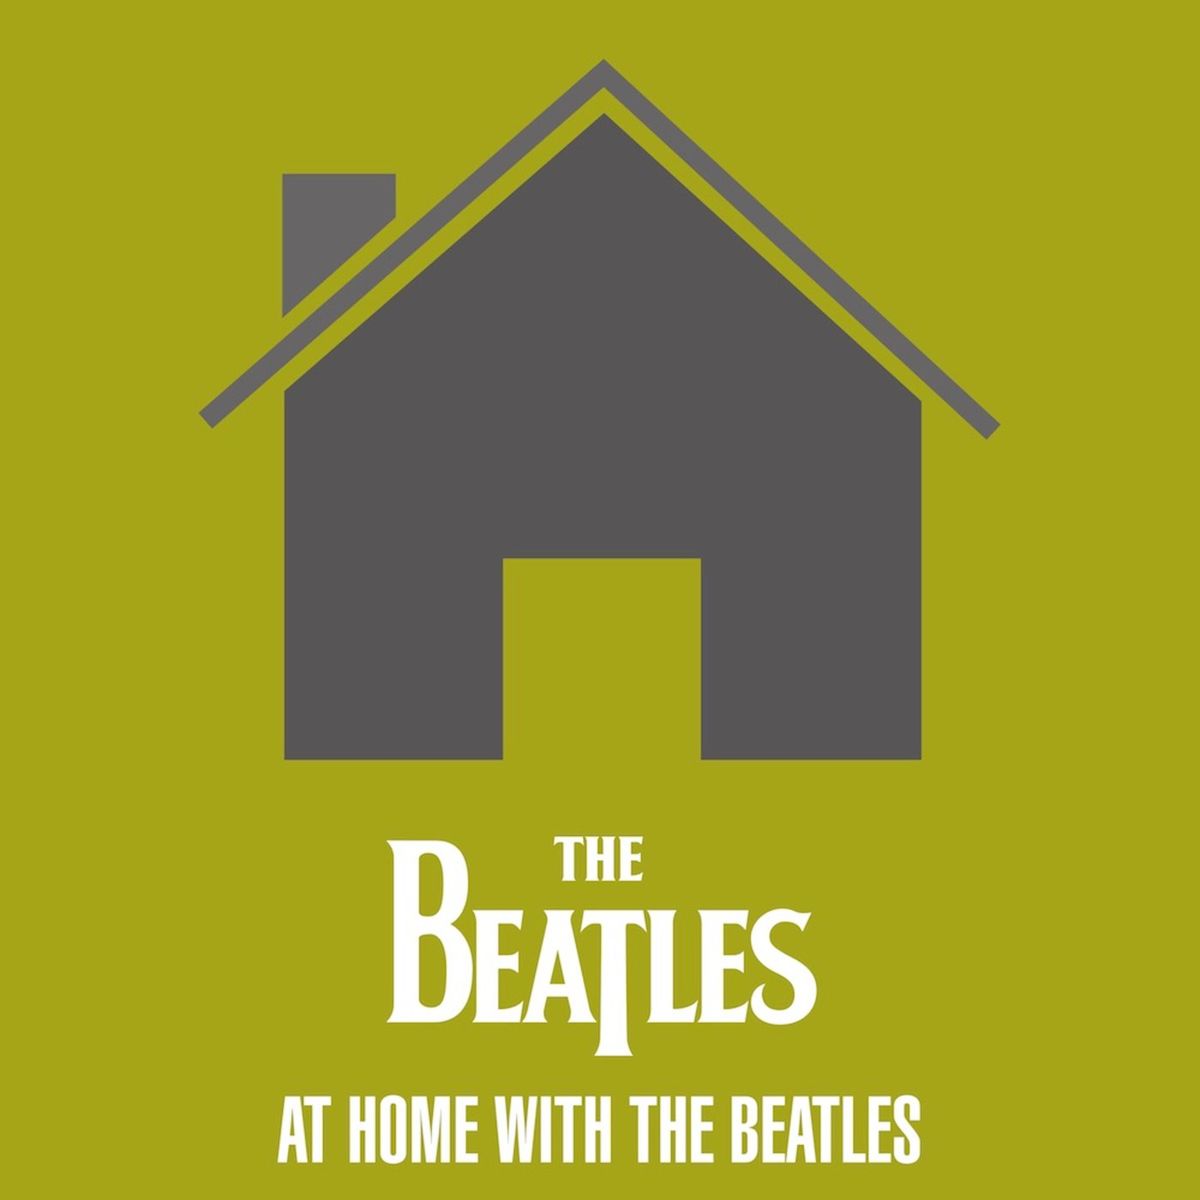 At Home With The Beatles